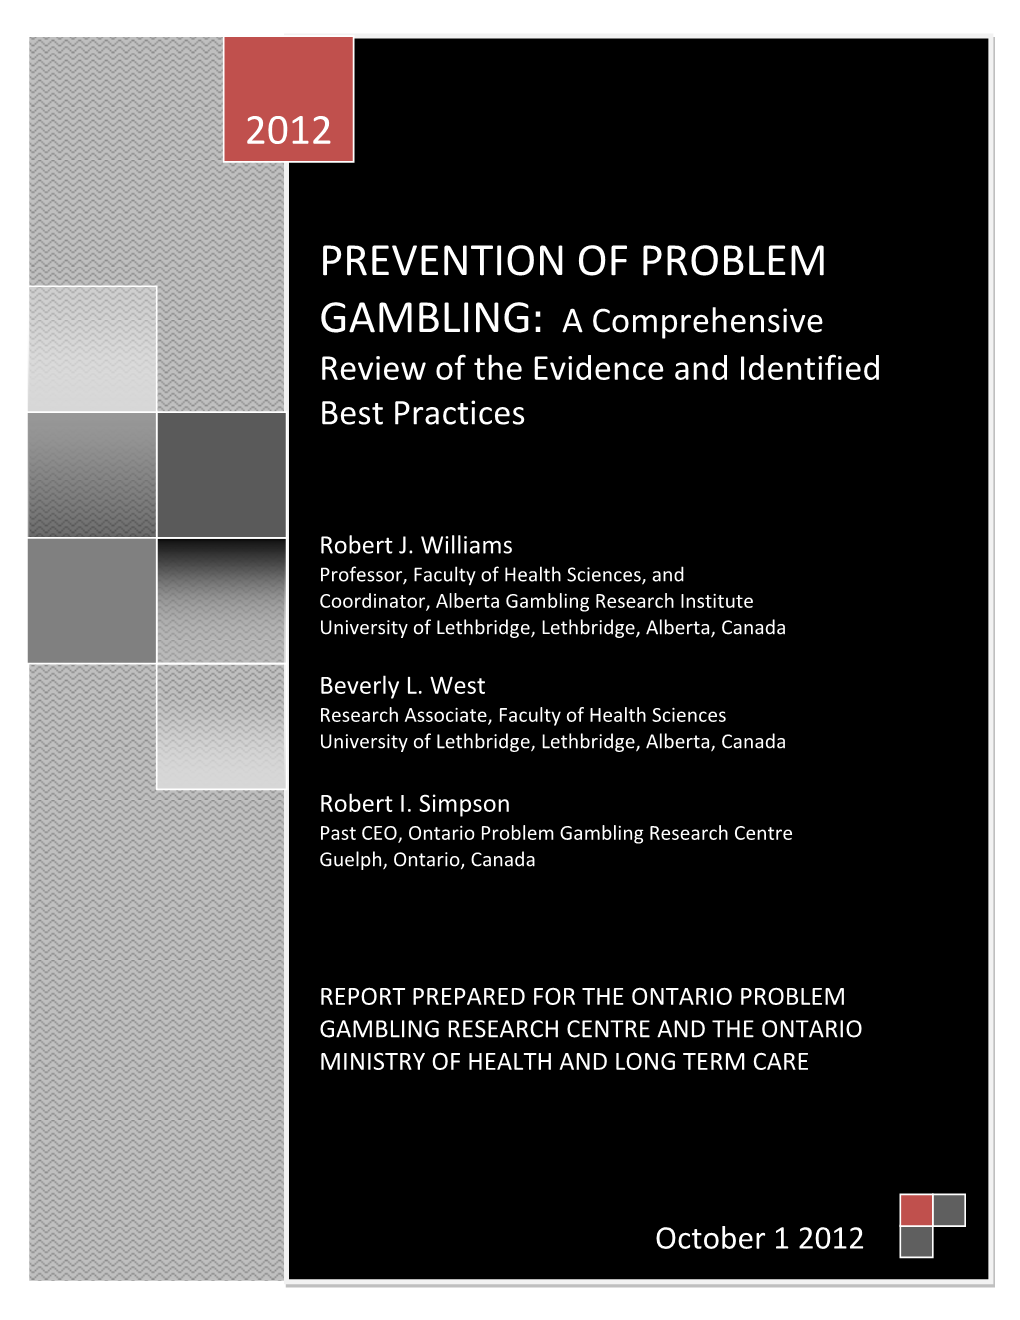 PREVENTION of PROBLEM GAMBLING: a Comprehensive Review of the Evidence and Identified Best Practices